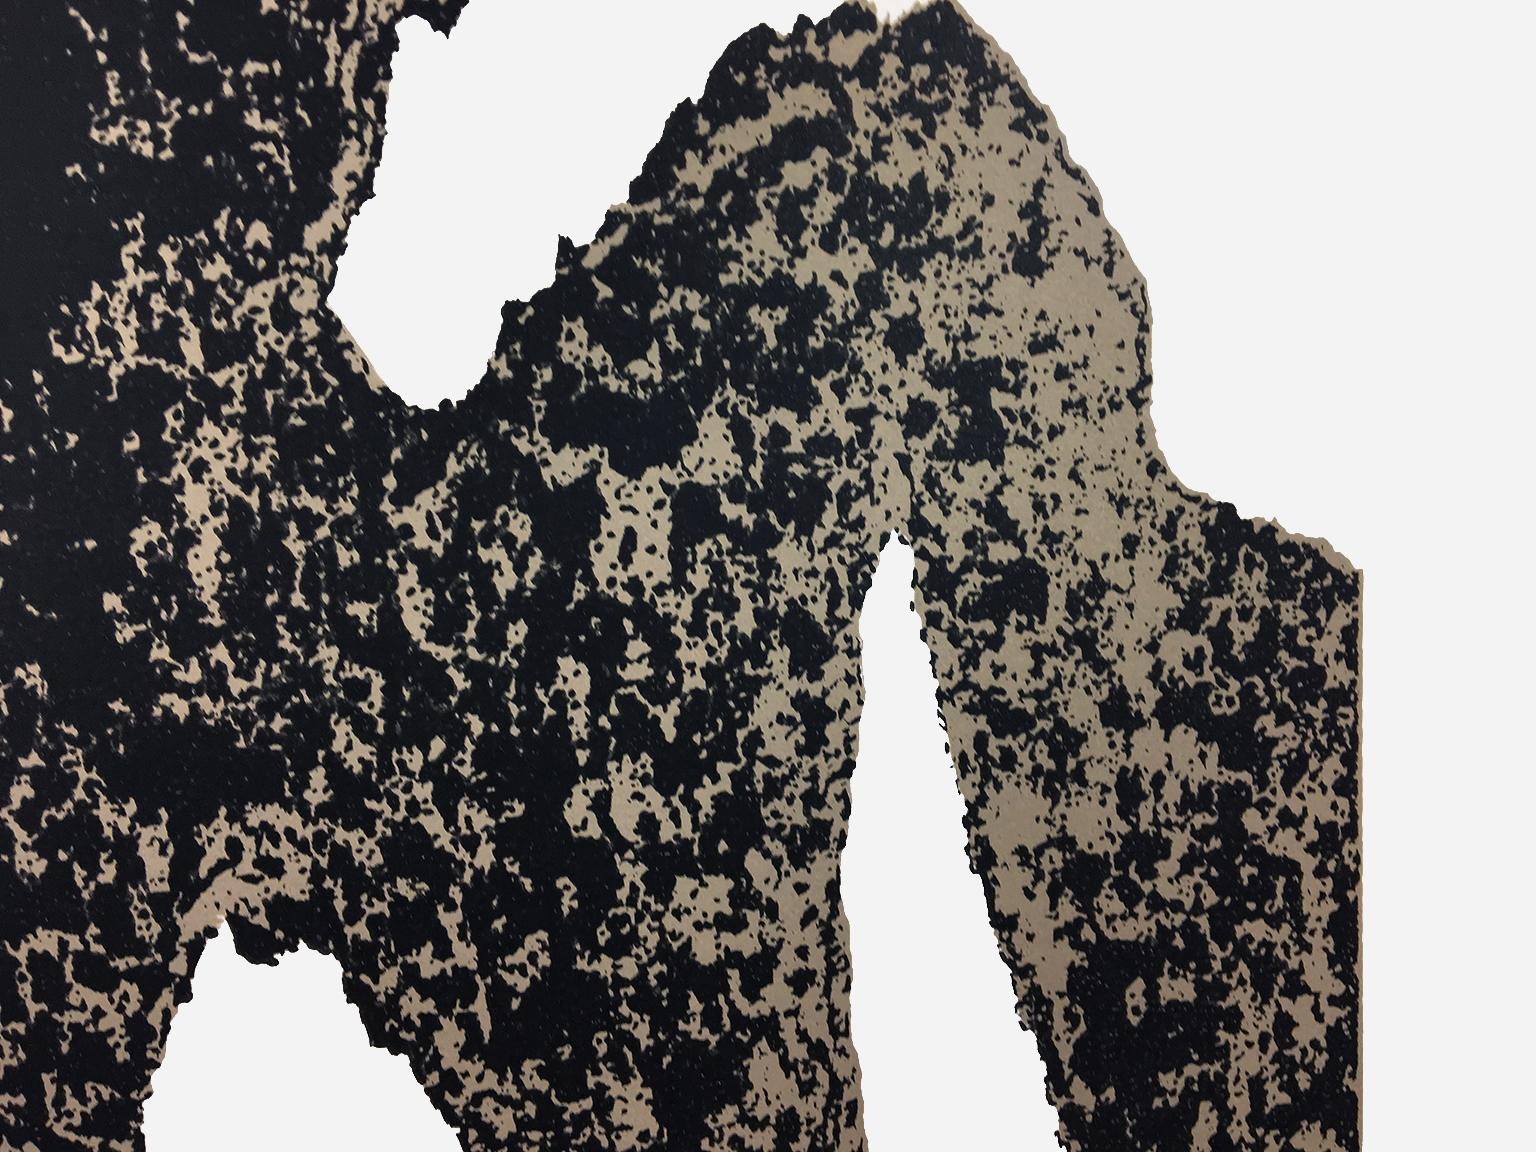 Ray Gun by Claes Oldenburg: screen print with raw black grey industrial texture  1